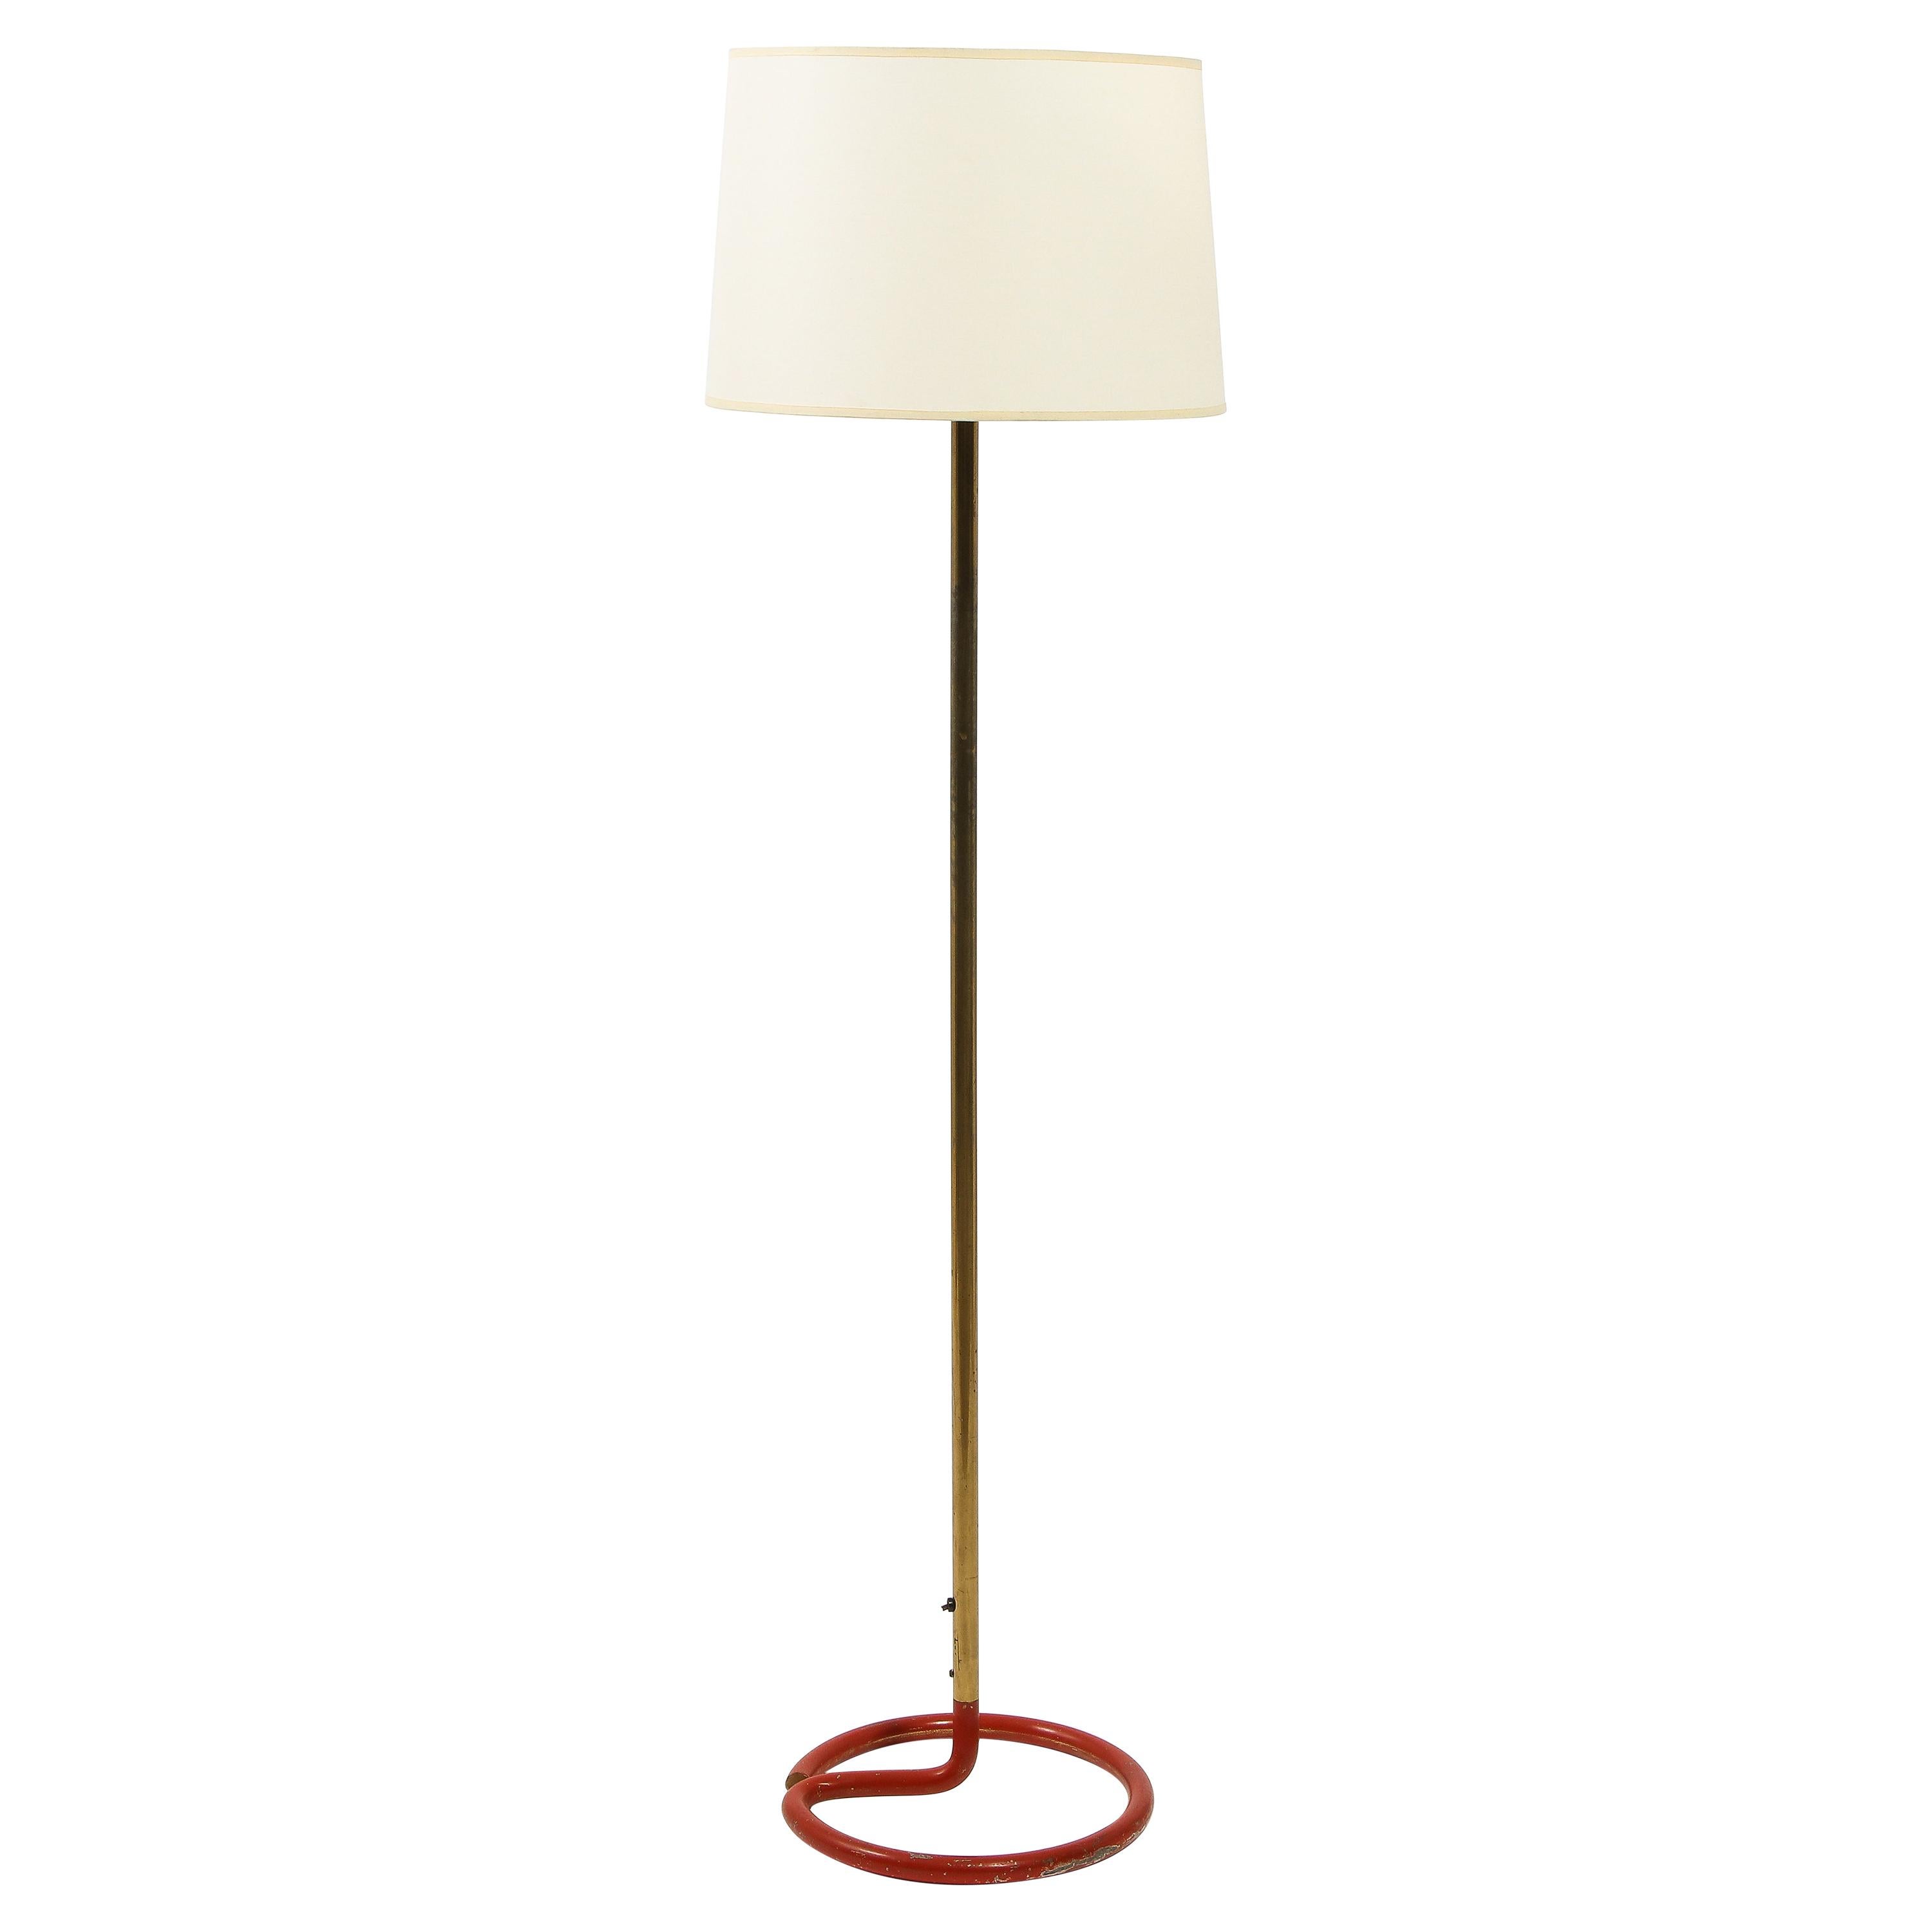 Red Wrougt Iron and Brass Floor Lamp by Stablet, France 1950's